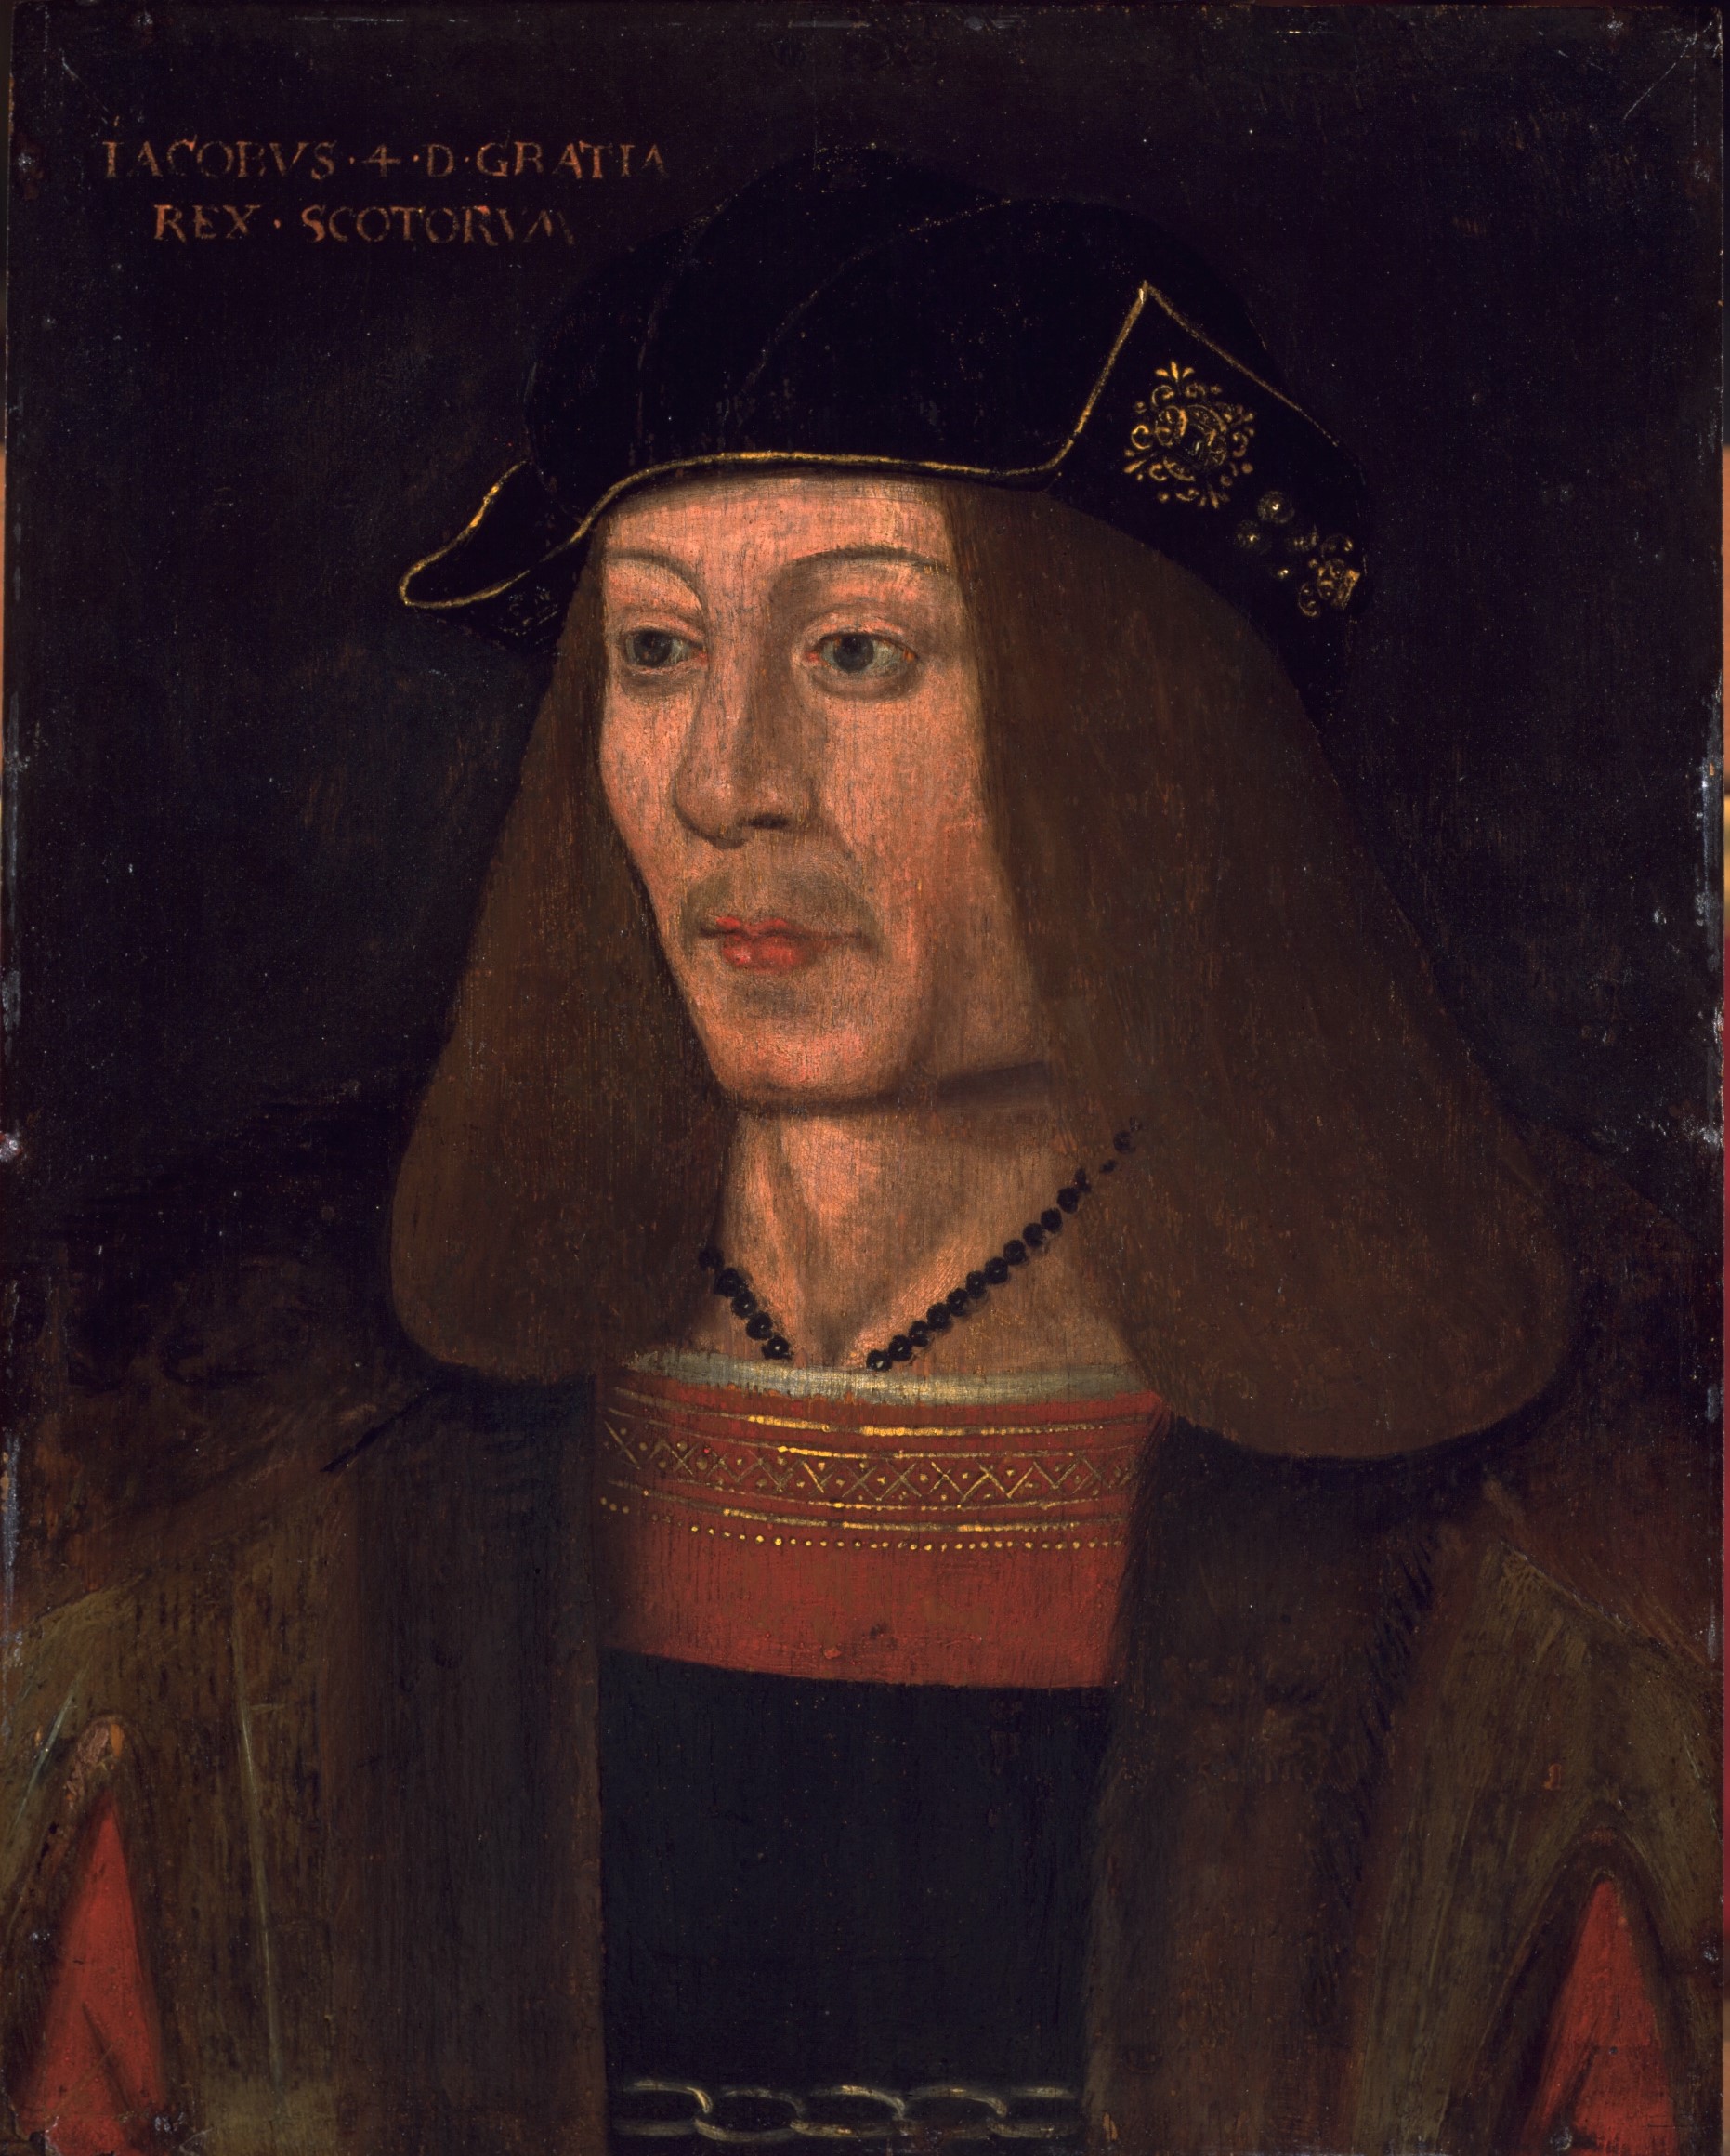 A portrait of James IV with long hair and dressed in gowns with golden embroidery.